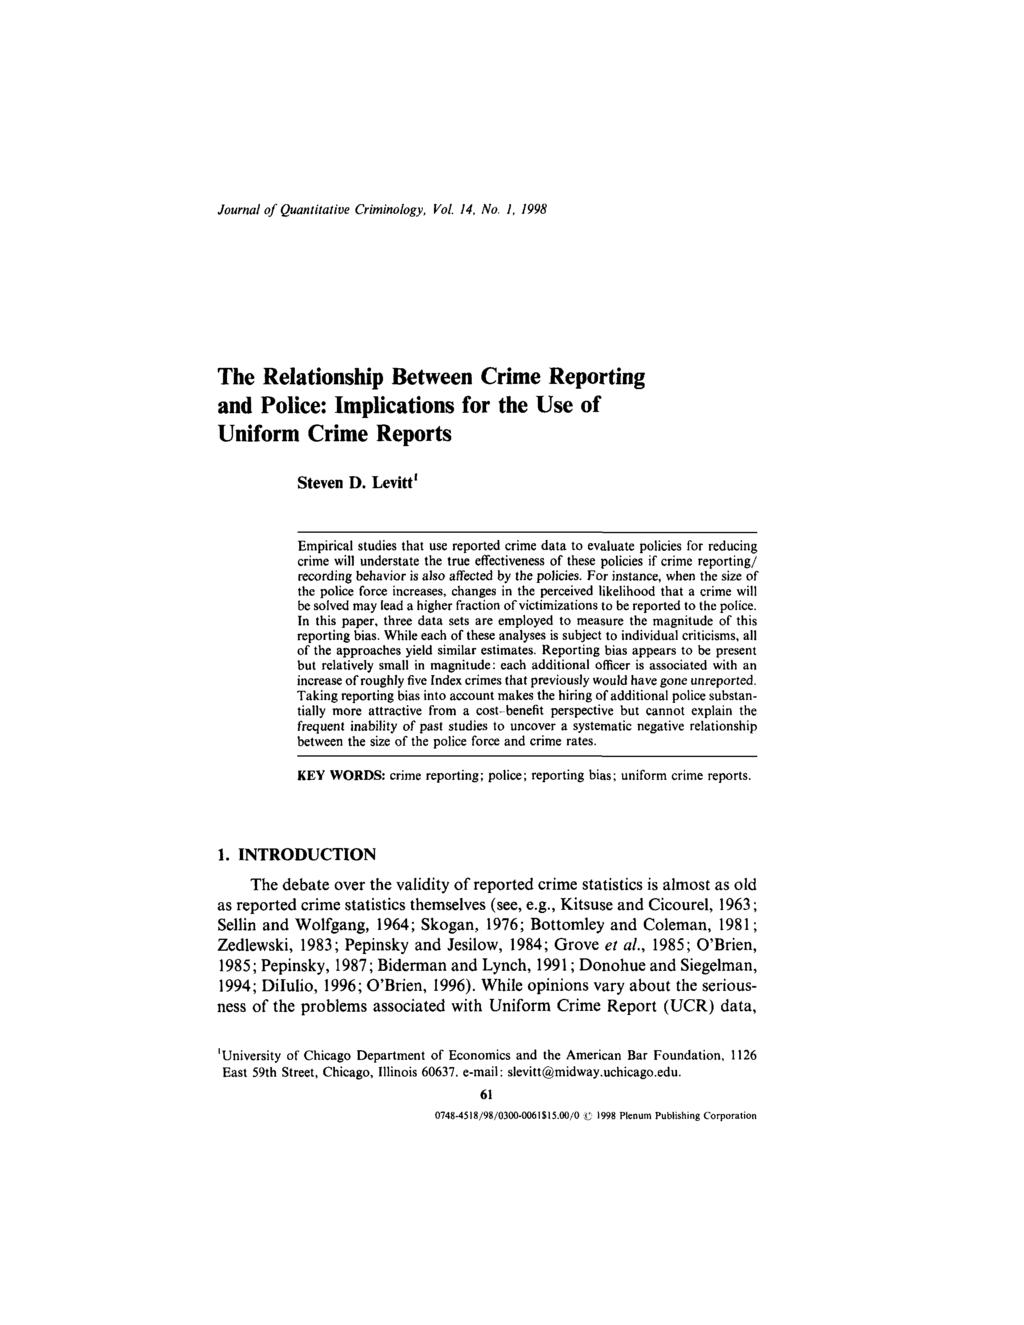 Journal of Quantitative Criminology, Vol. 14, No. 1, 1998 The Relationship Between Crime Reporting and Police: Implications for the Use of Uniform Crime Reports Steven D.